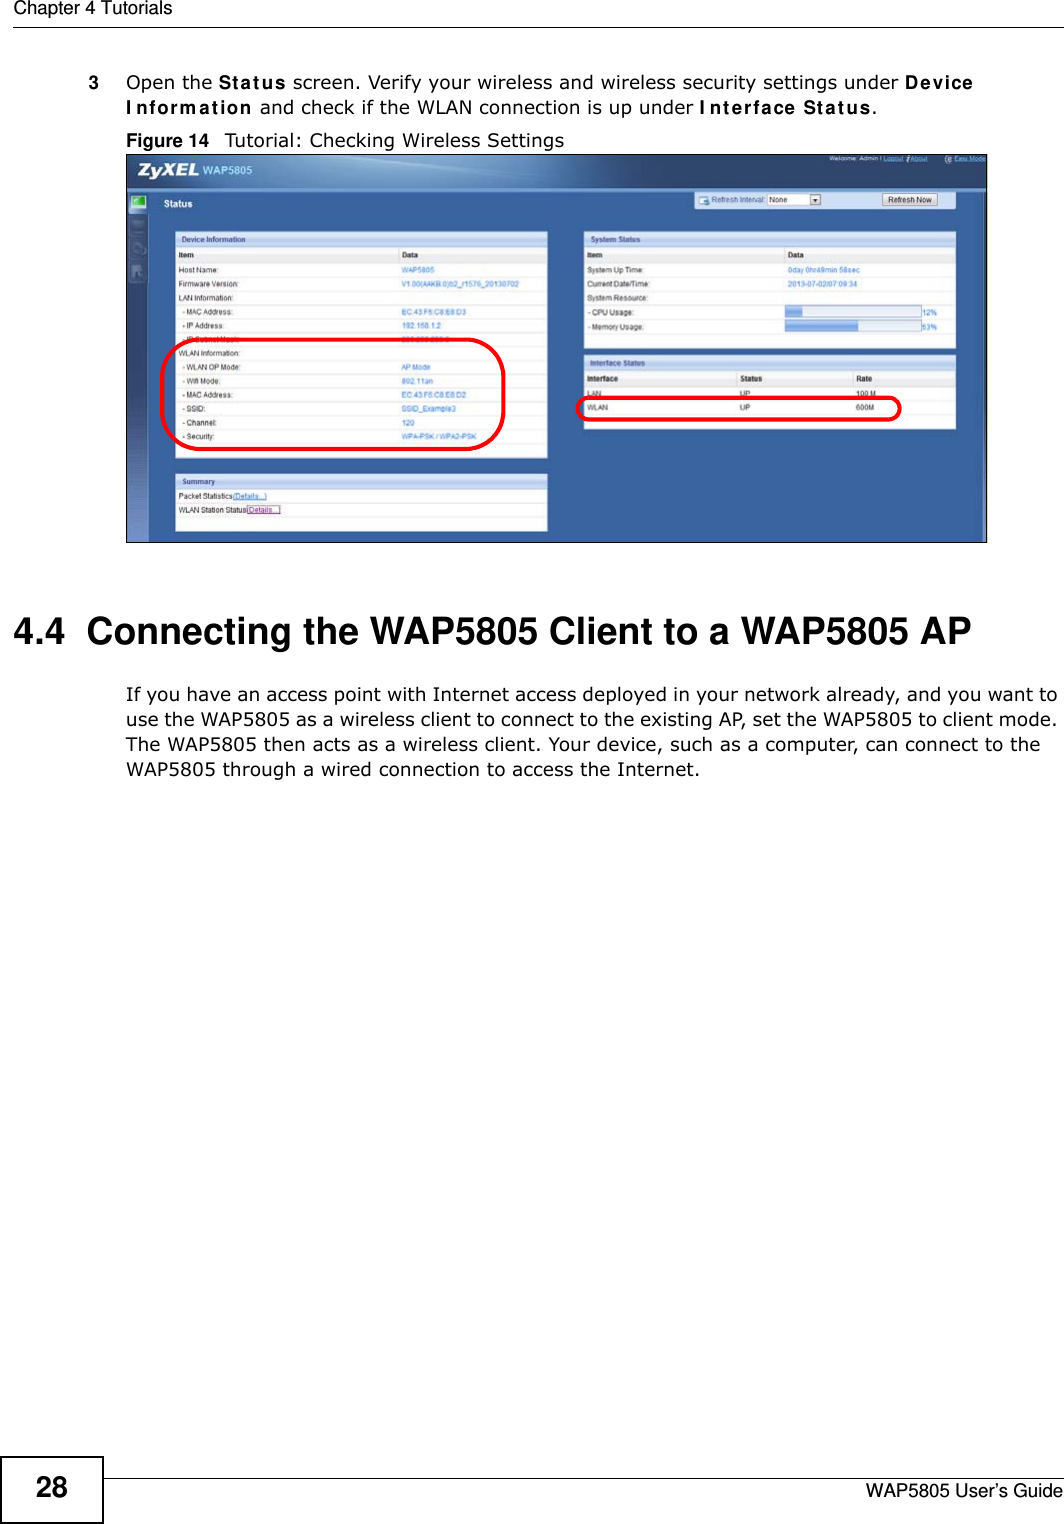 Chapter 4 TutorialsWAP5805 User’s Guide283Open the Status screen. Verify your wireless and wireless security settings under Device Information and check if the WLAN connection is up under Interface Status.Figure 14   Tutorial: Checking Wireless Settings4.4  Connecting the WAP5805 Client to a WAP5805 APIf you have an access point with Internet access deployed in your network already, and you want to use the WAP5805 as a wireless client to connect to the existing AP, set the WAP5805 to client mode. The WAP5805 then acts as a wireless client. Your device, such as a computer, can connect to the WAP5805 through a wired connection to access the Internet.